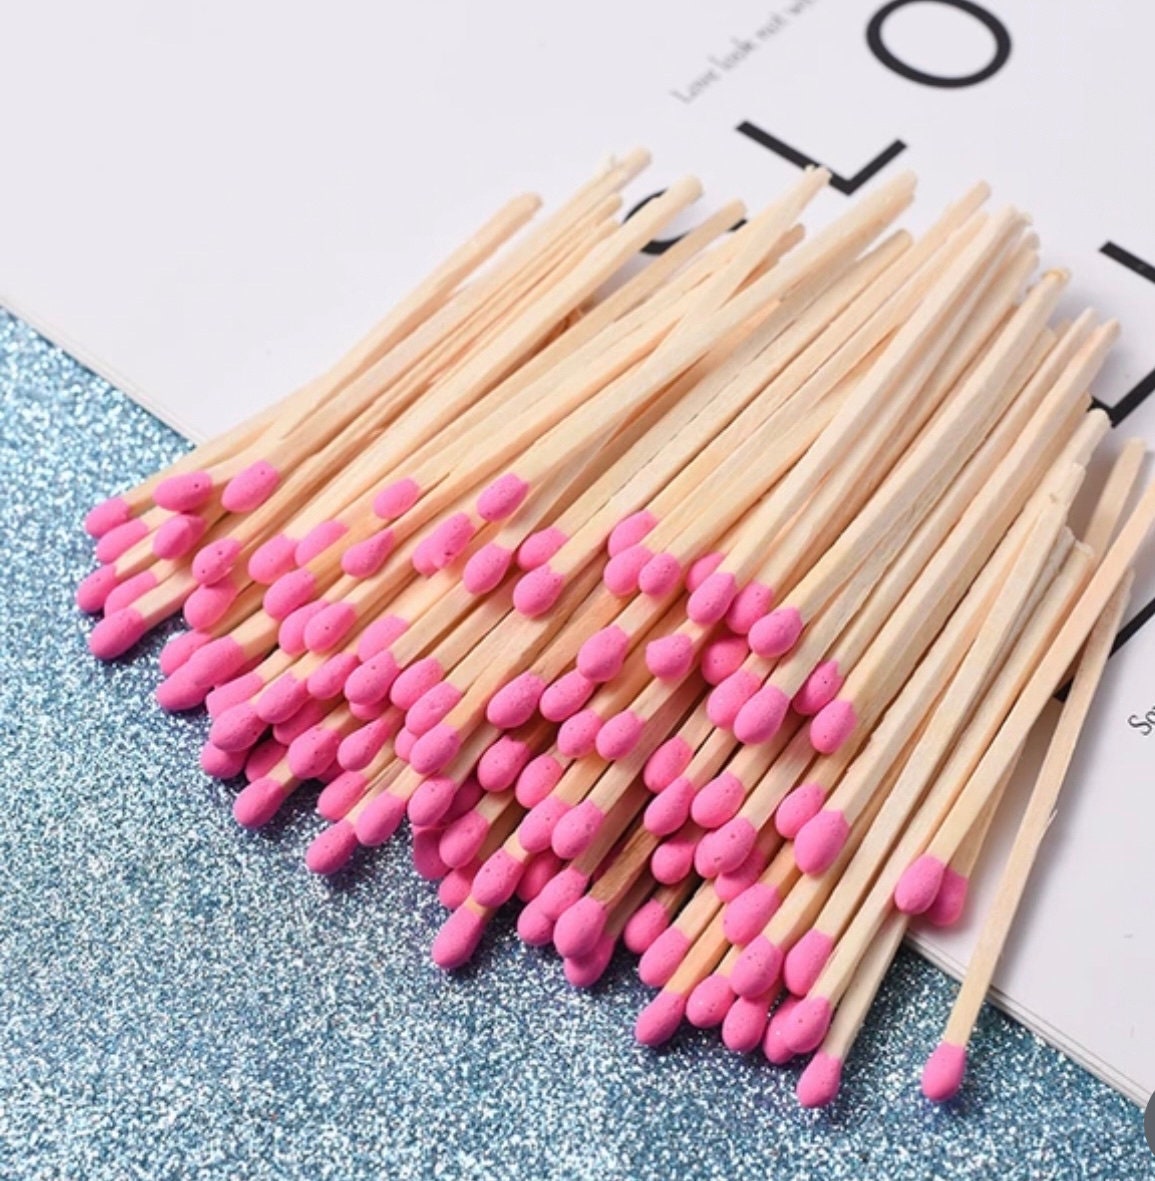 200Pcs 3'' Decorative Rainbow Matches, Premium Long Wooden Safety Matches  for Candles, Lighting Candles, Long Wooden Candle Matches Matchsticks for